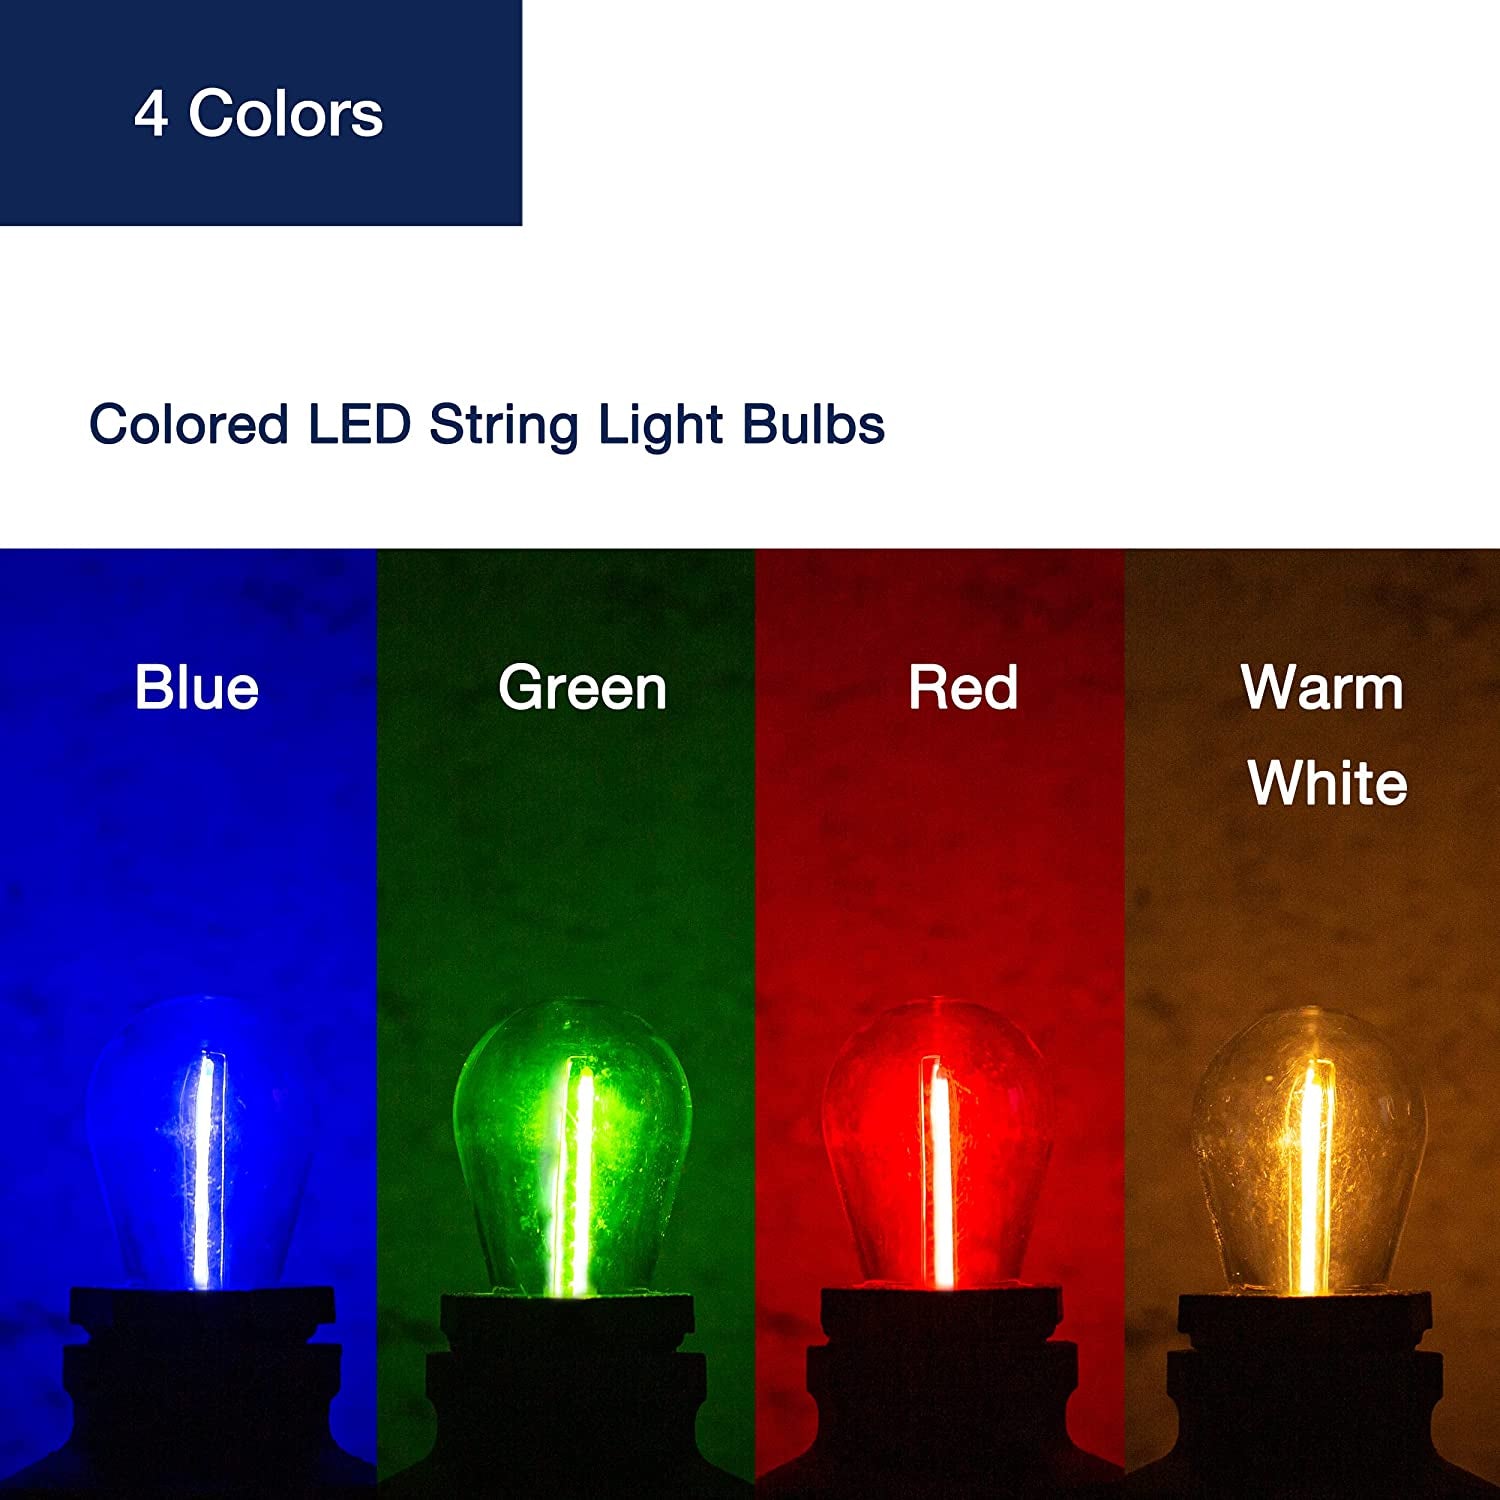 24-Pack S14 Colored LED String Light Bulbs, 1W Waterproof Outdoor Indoor Replacement Bulbs, E26 Base, CRI80, Red/Green/Blue/Warm White